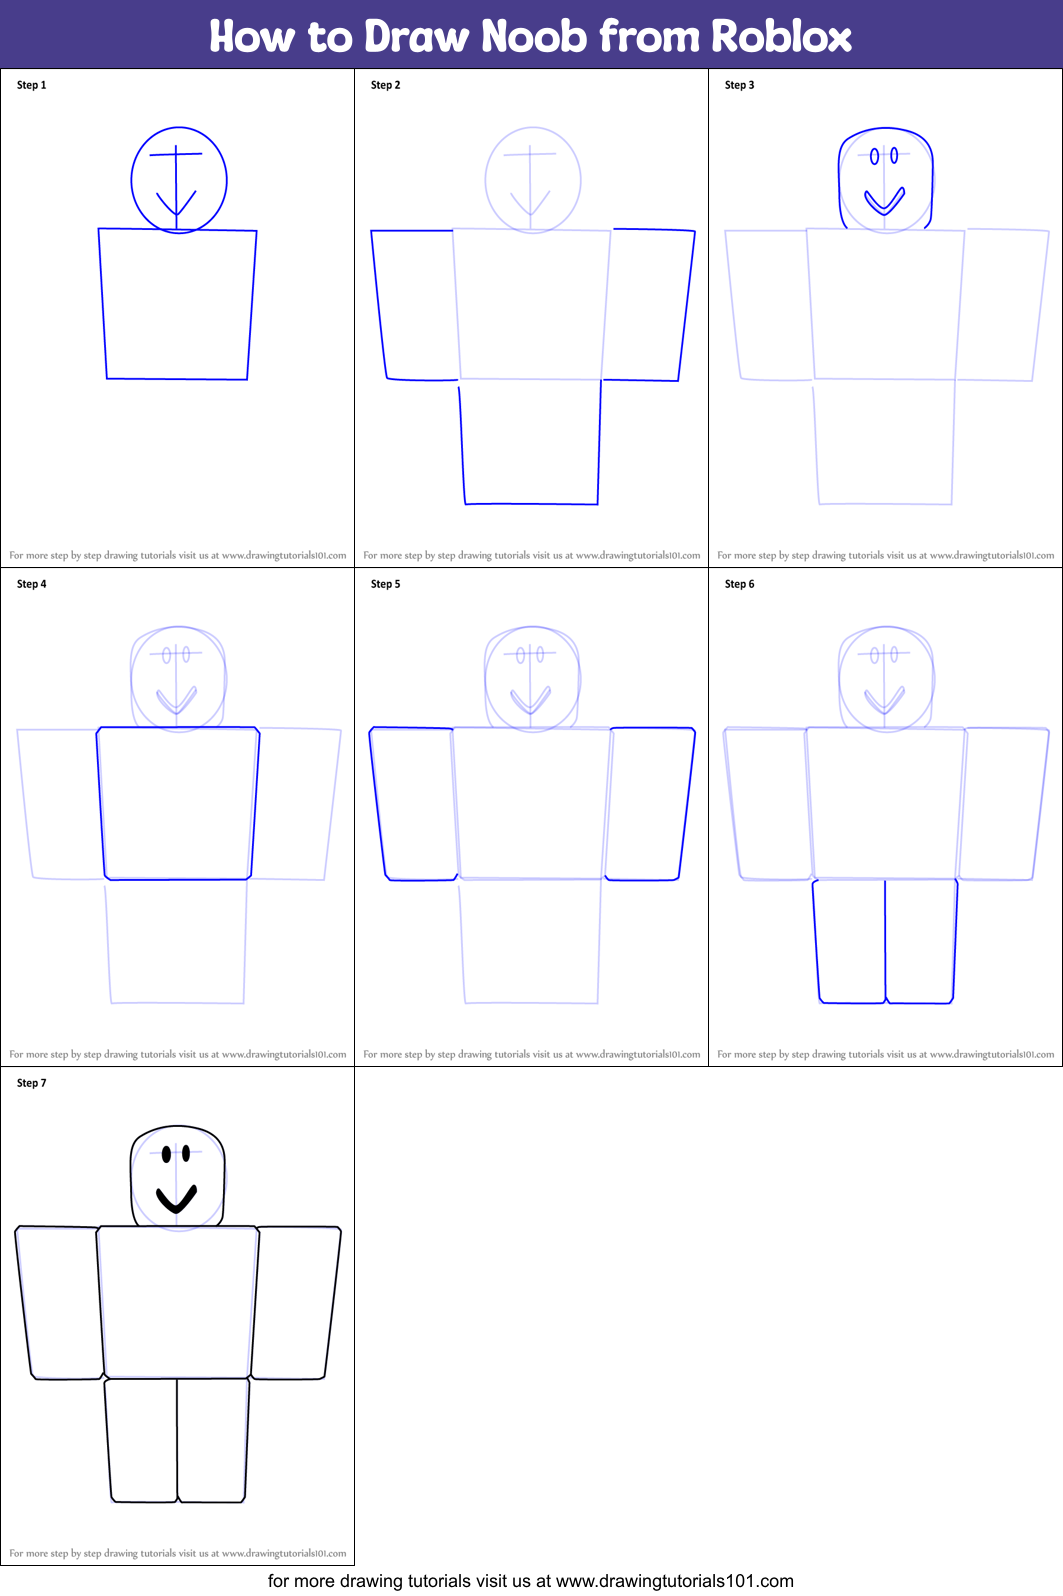 How To Draw Noob From Roblox Printable Step By Step Drawing Sheet Drawingtutorials101 Com - roblox tutorials